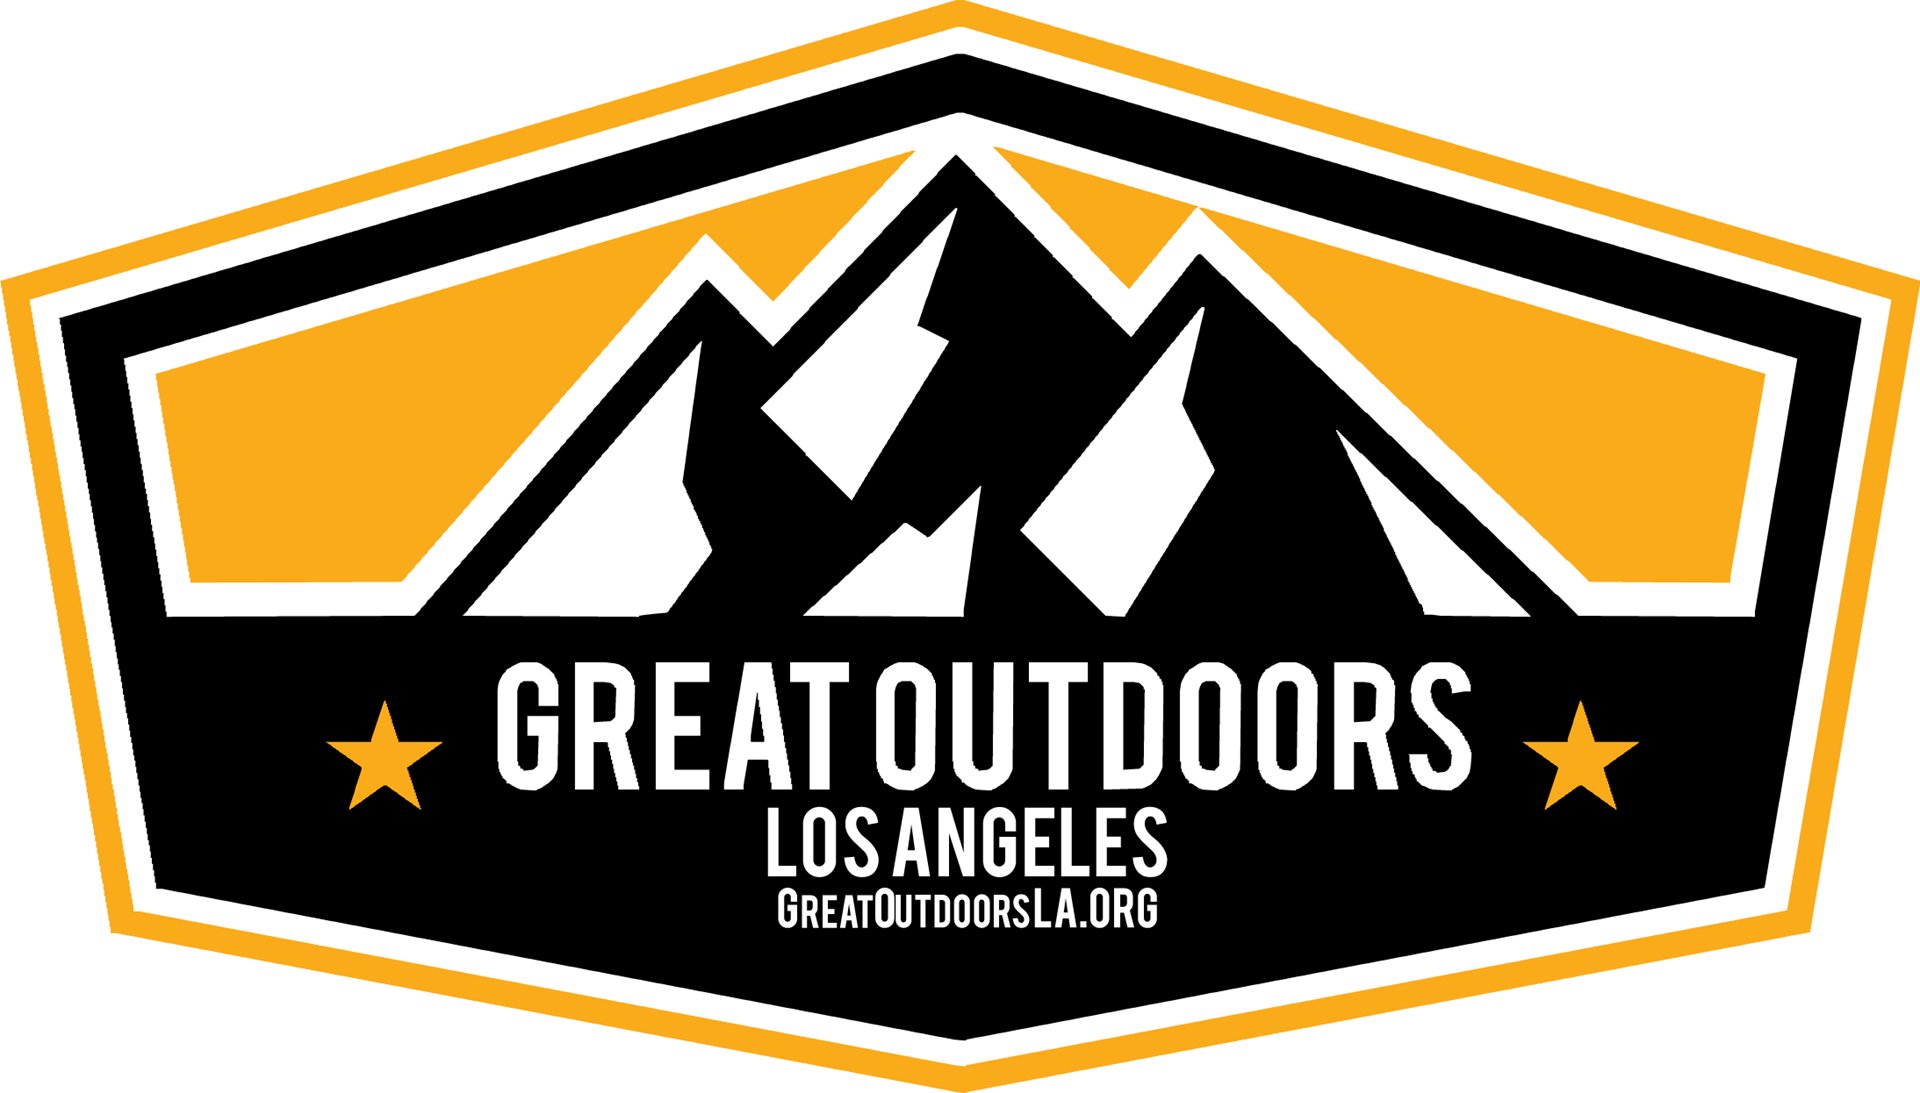 Great Outdoors Los Angeles